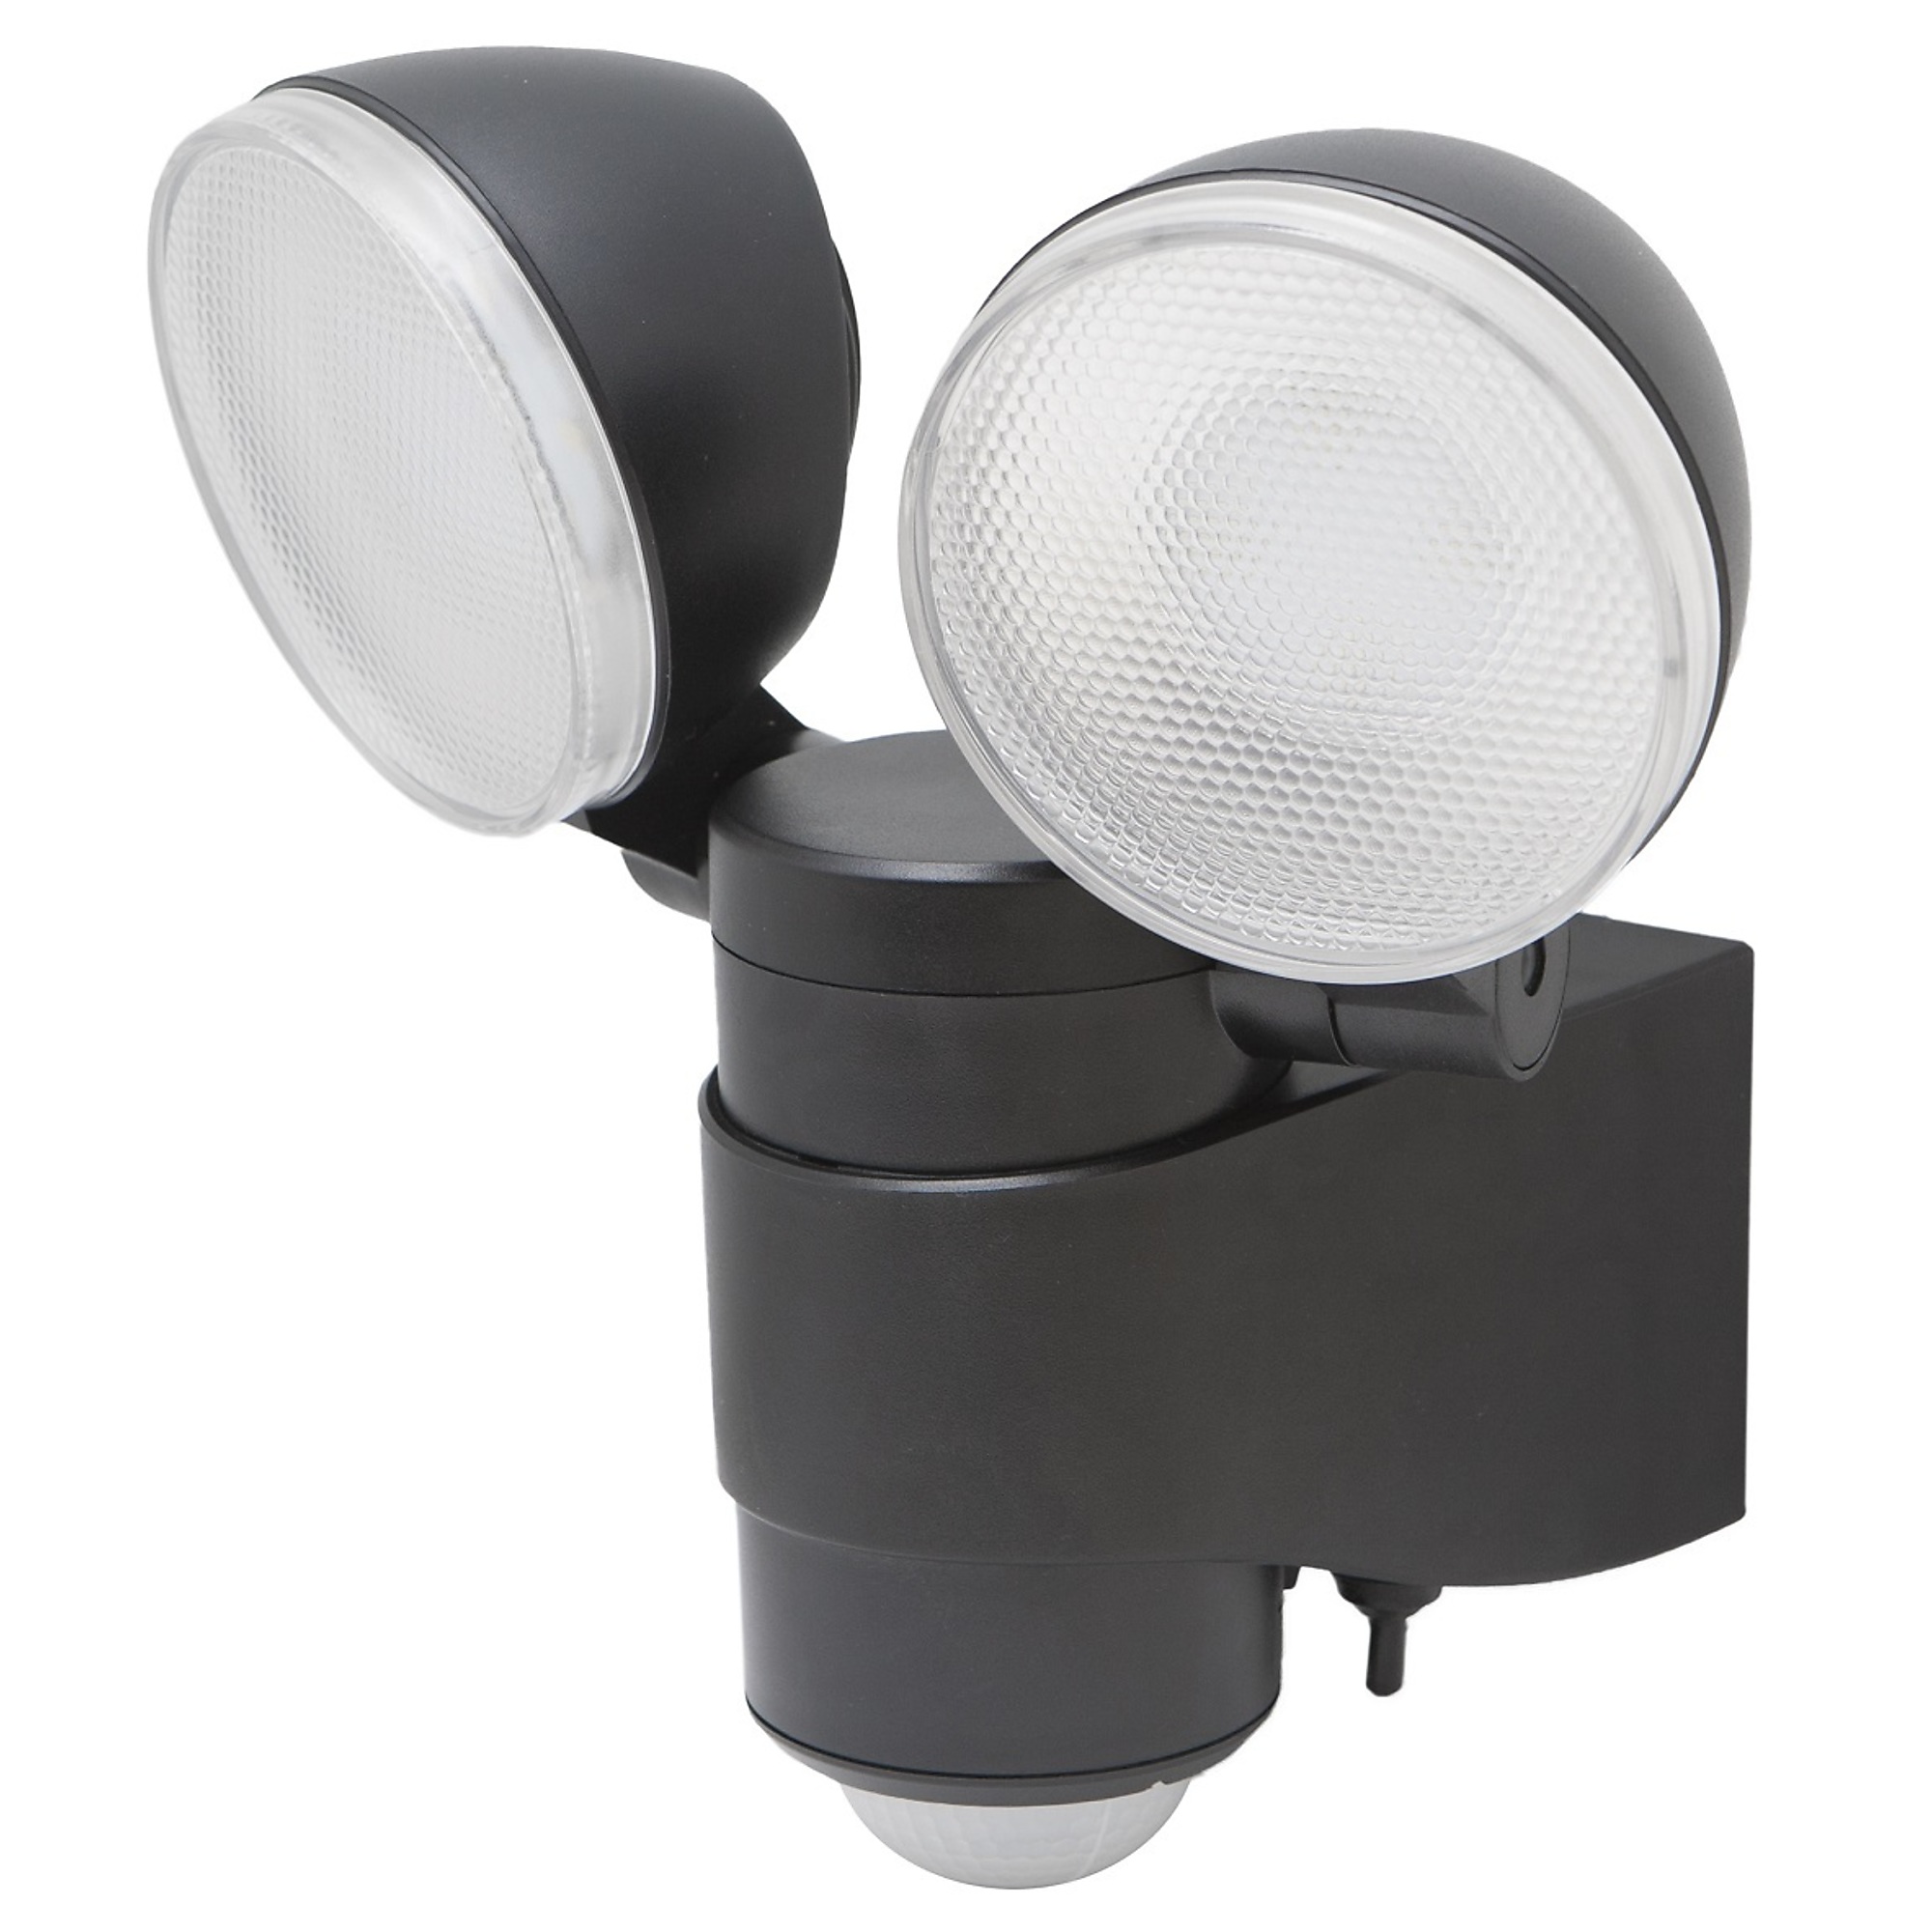 Maxsa Innovations, Battery-Powered Motion-Activated Security Spotlight, Light Bulb Type Appliance, Model 43218